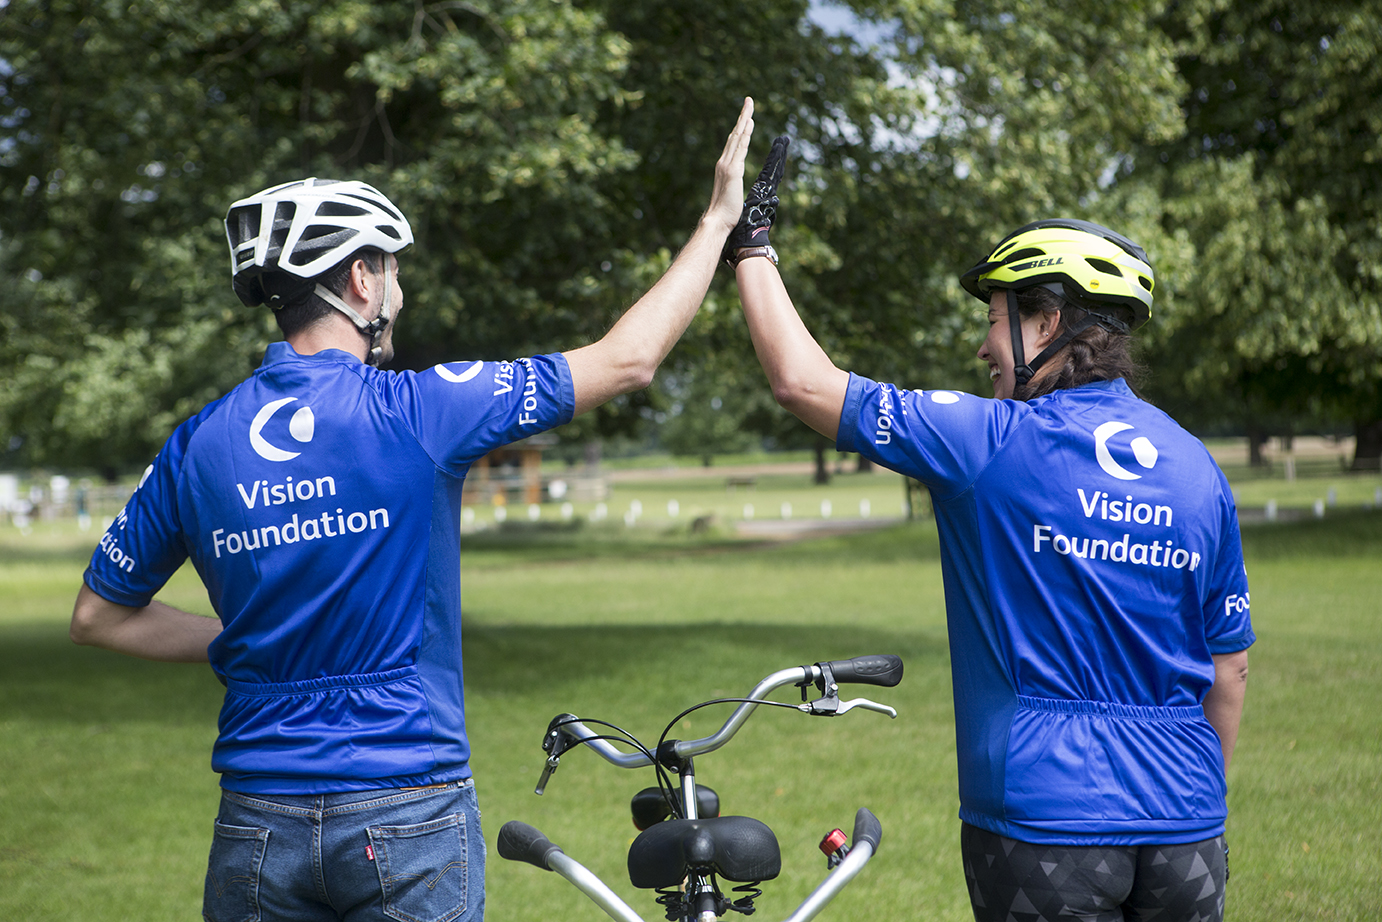 Two people wearing cycling helmets and blue Vision Foundation branded cycling jerseys are facing away from the camera and high fiving each other. They are outside in a park and there is a tandem bicycle between them.